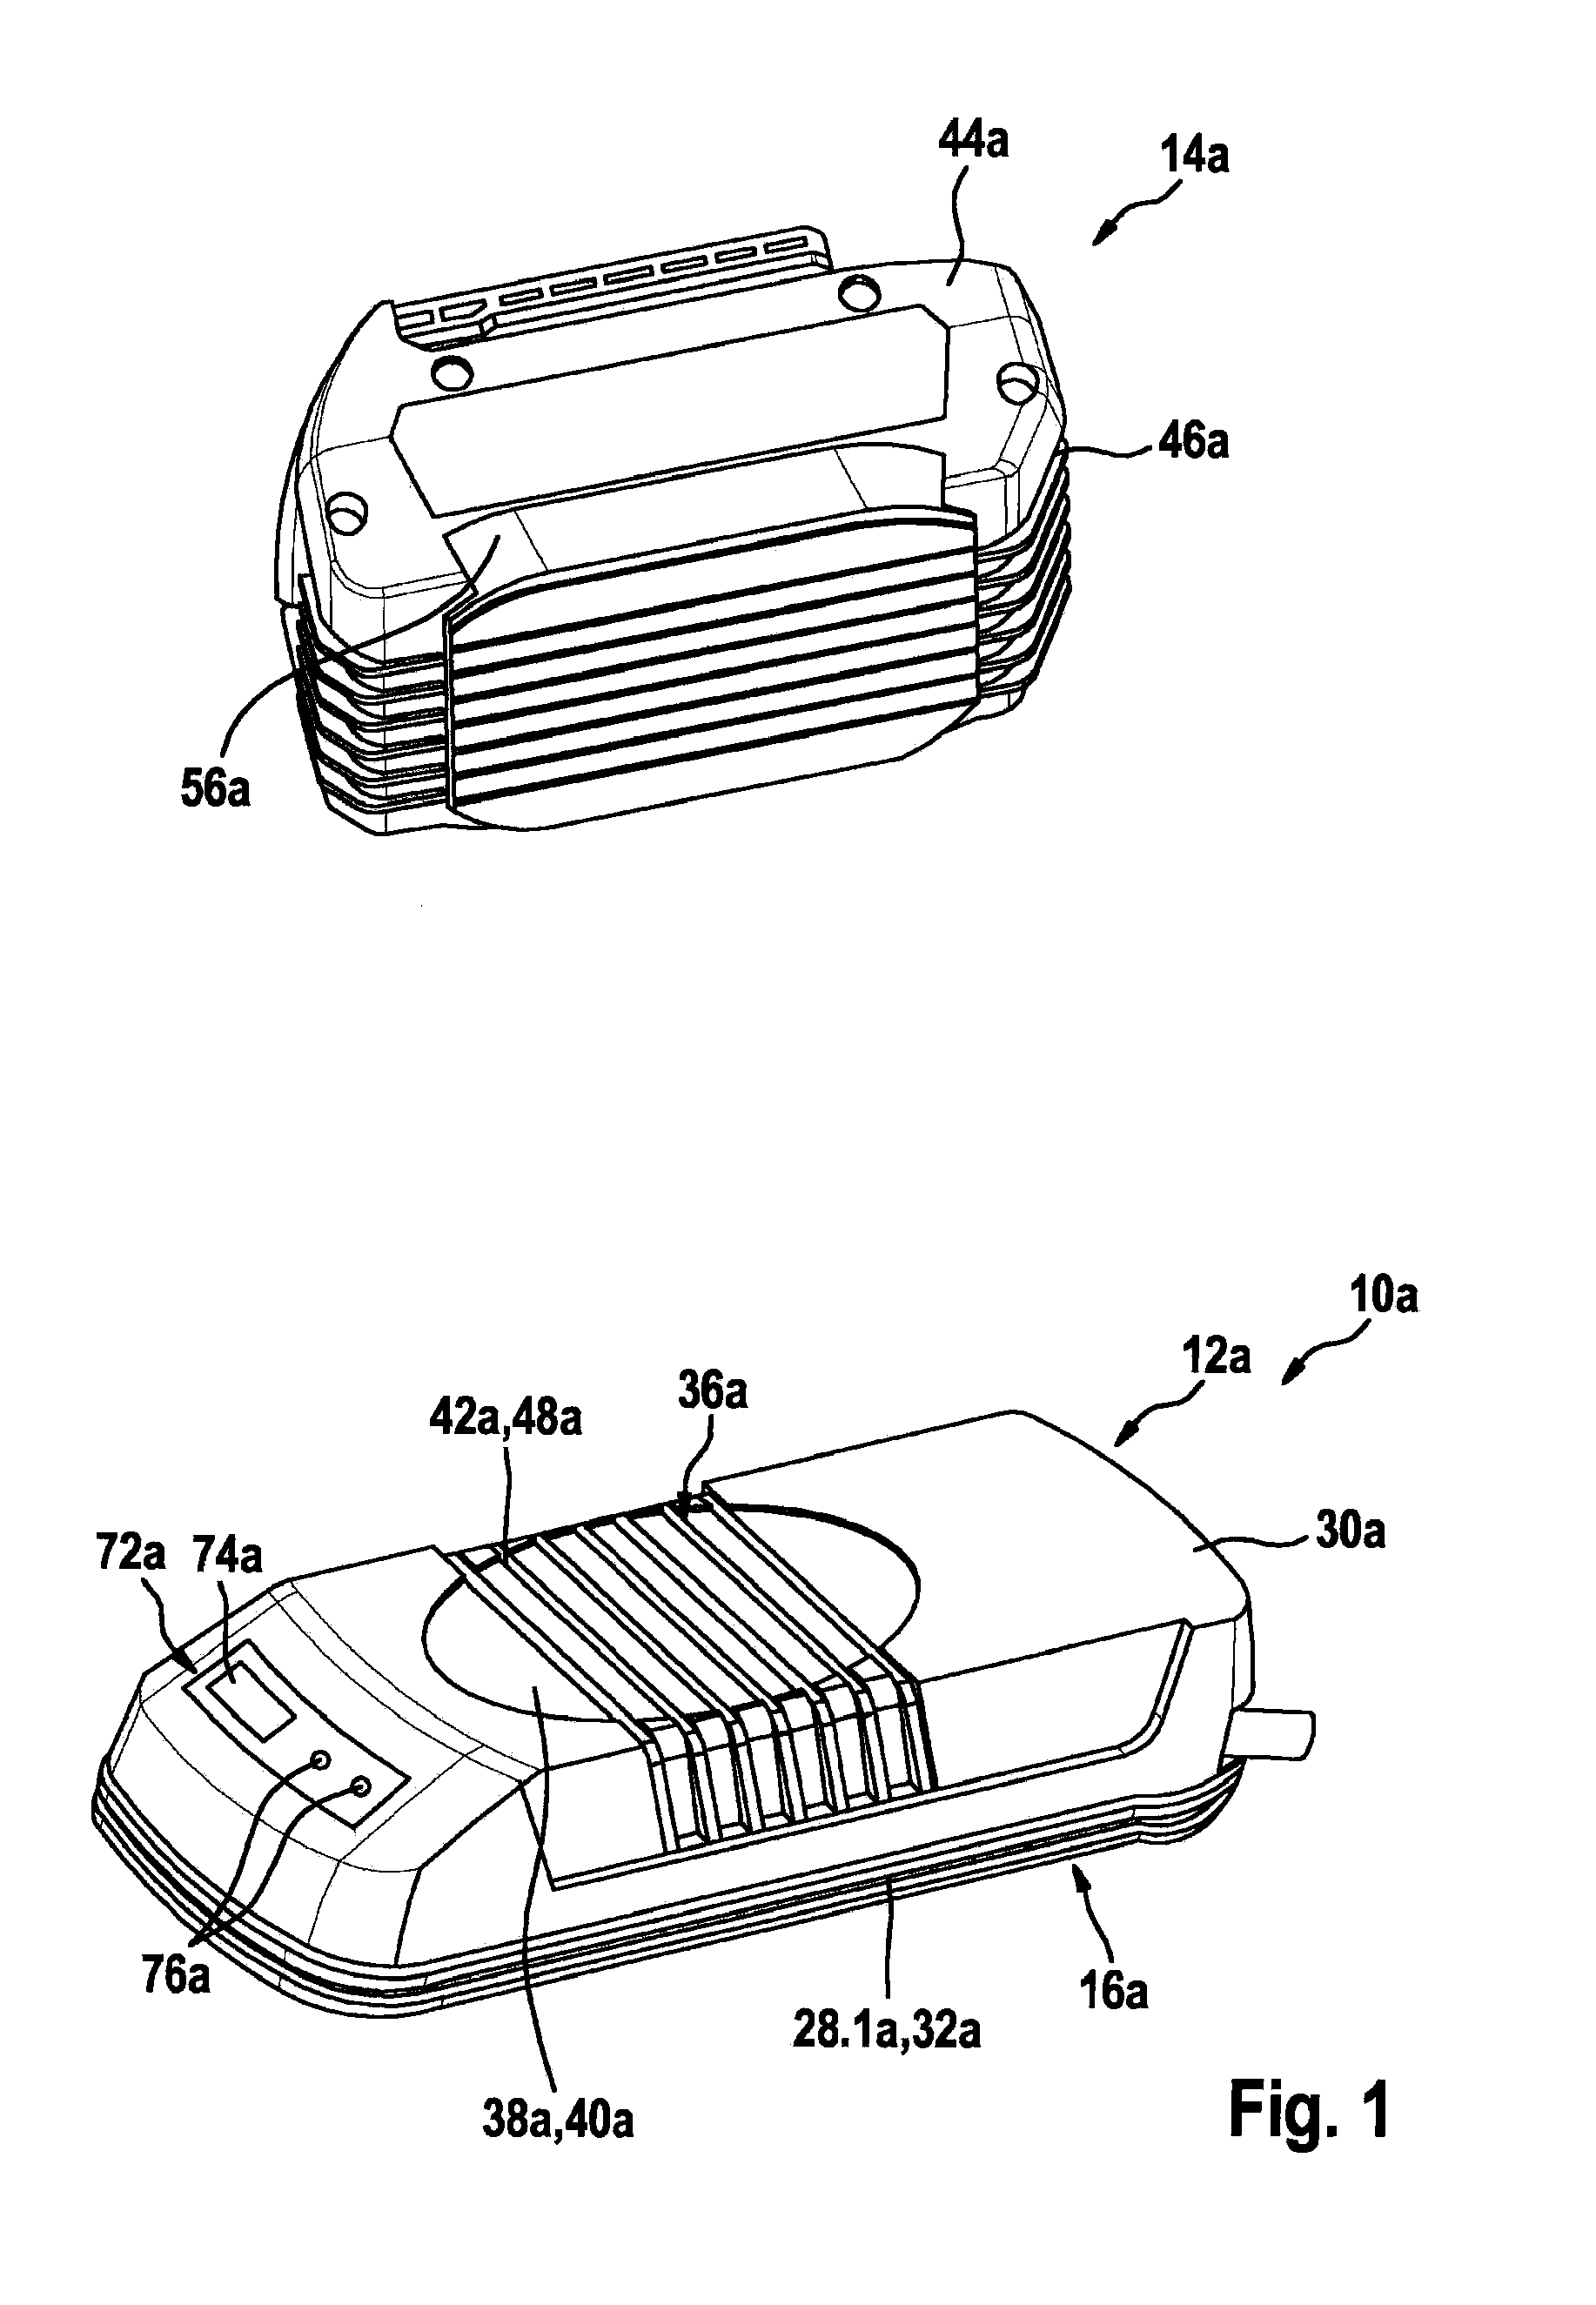 Inductive charging device